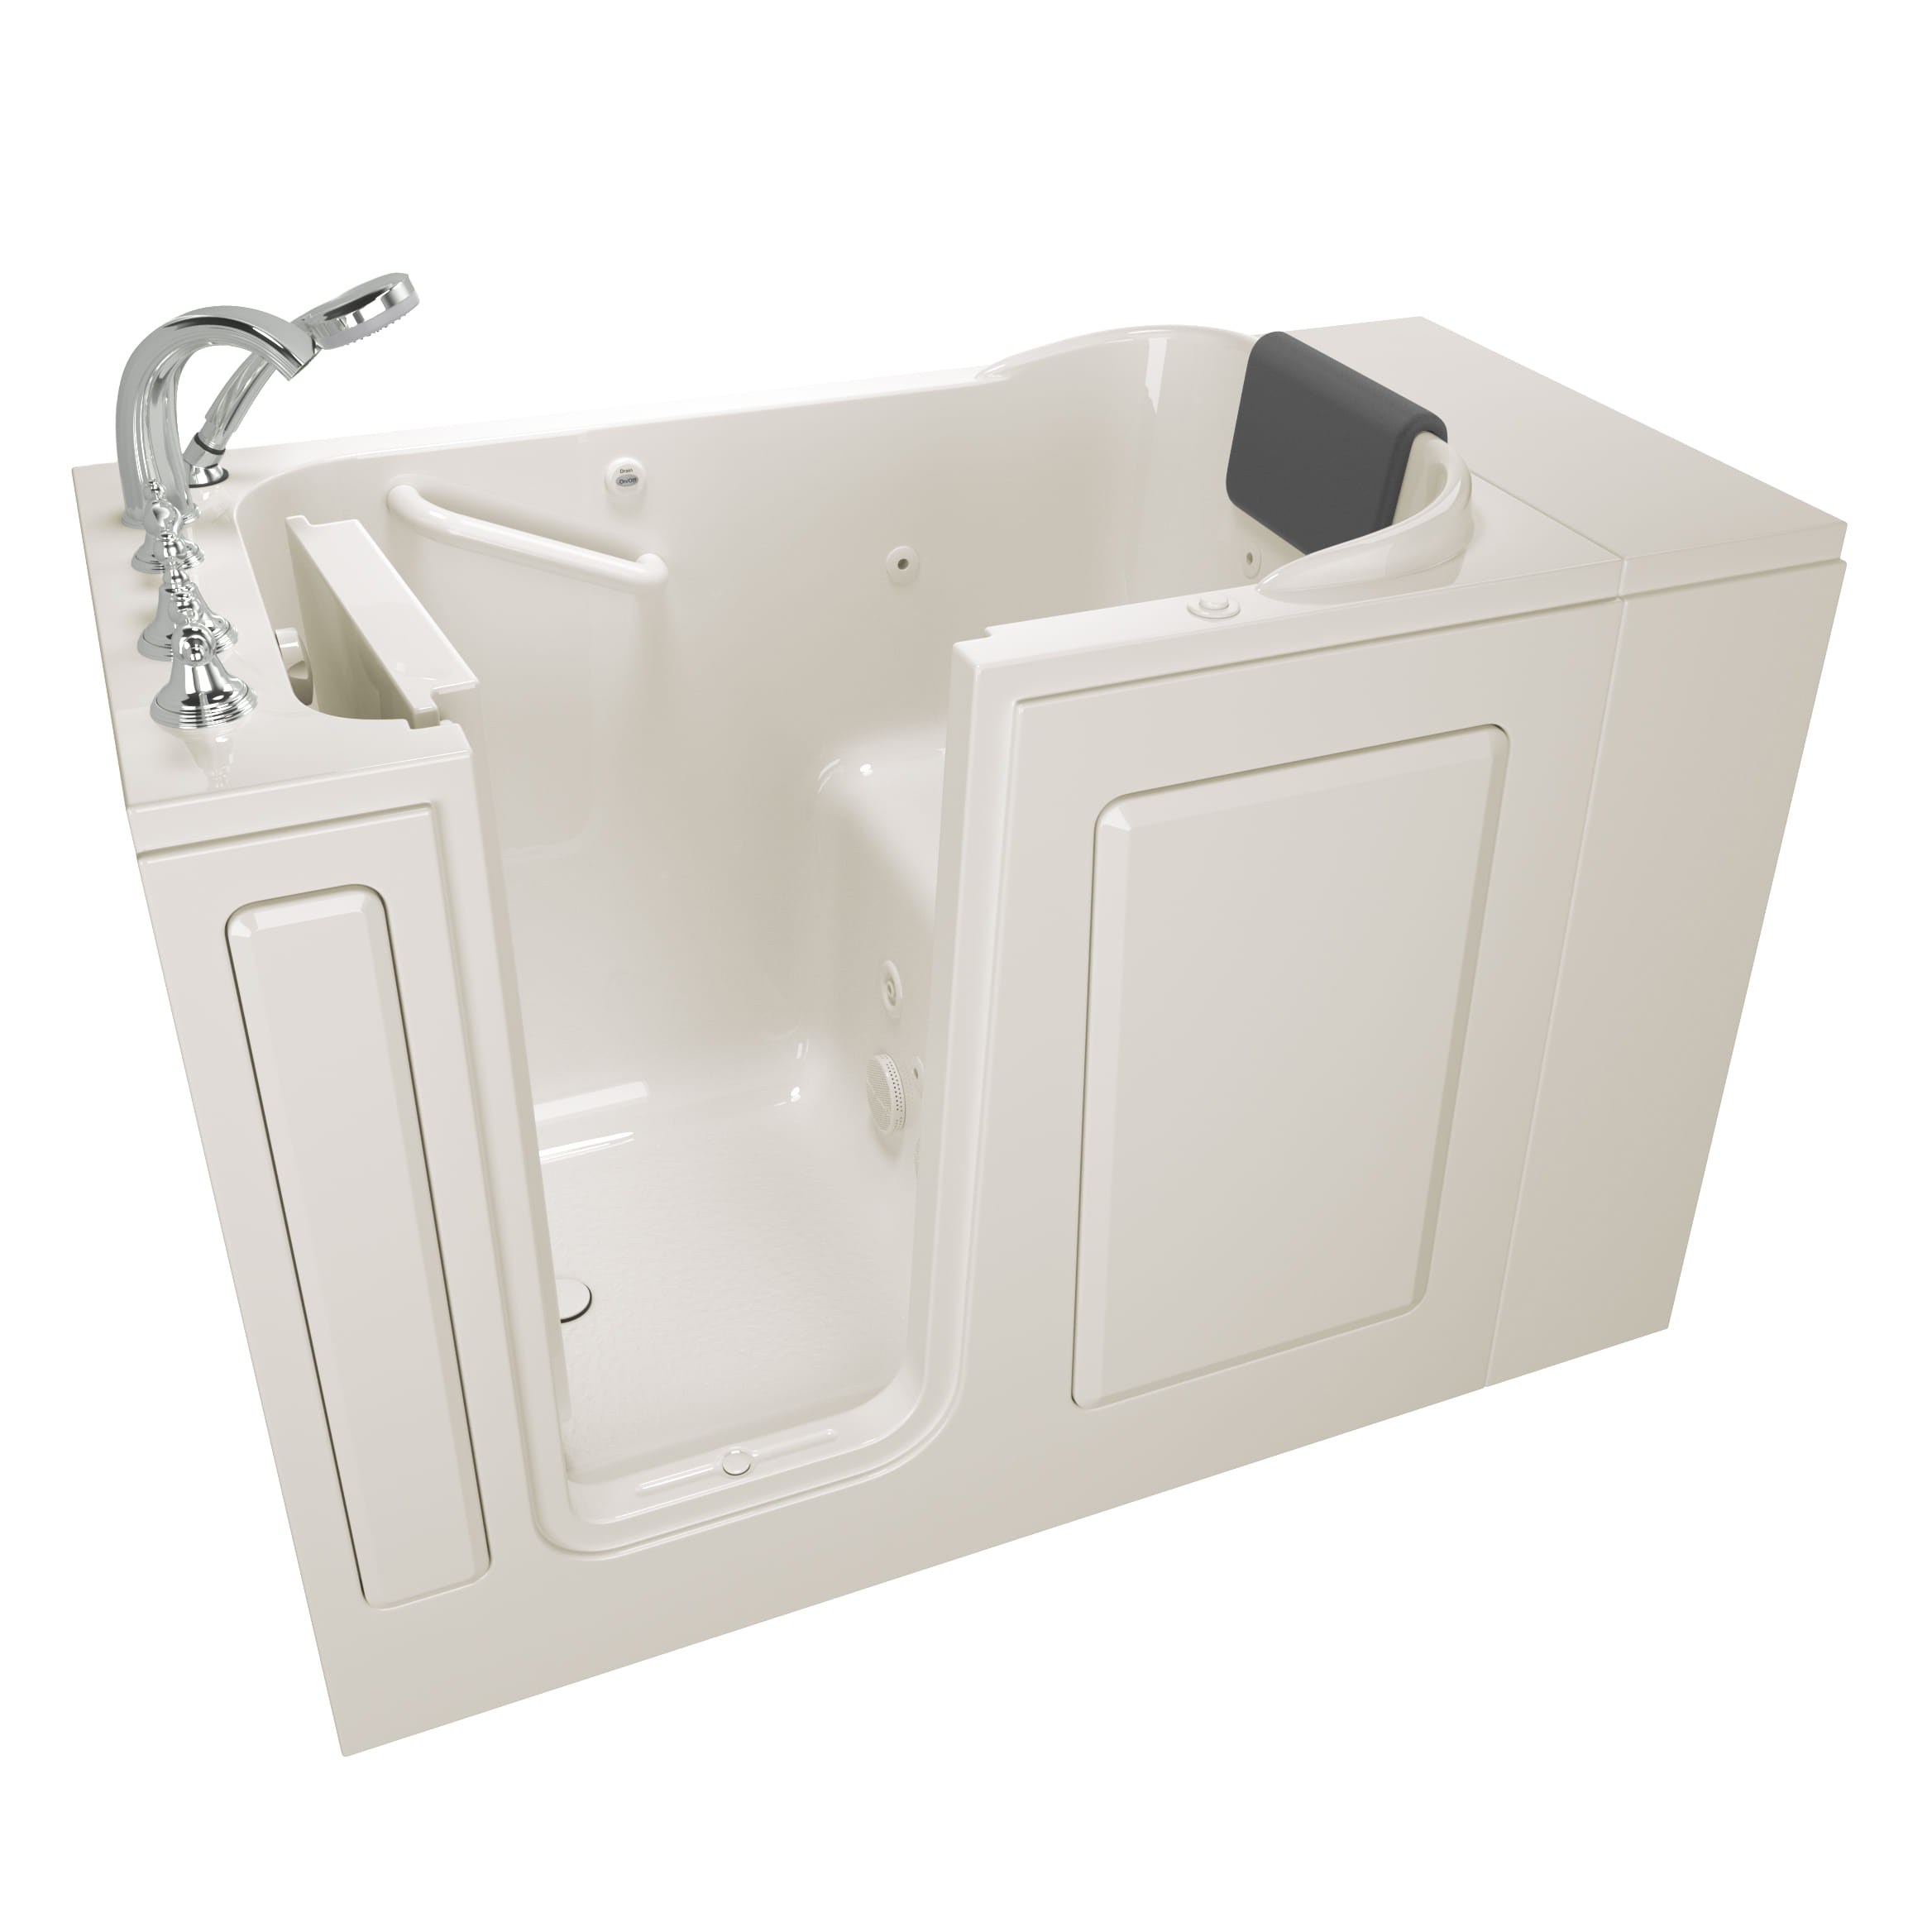 Gelcoat Premium Series 28 x 48-Inch Walk-in Tub With Whirlpool System - Left-Hand Drain With Faucet